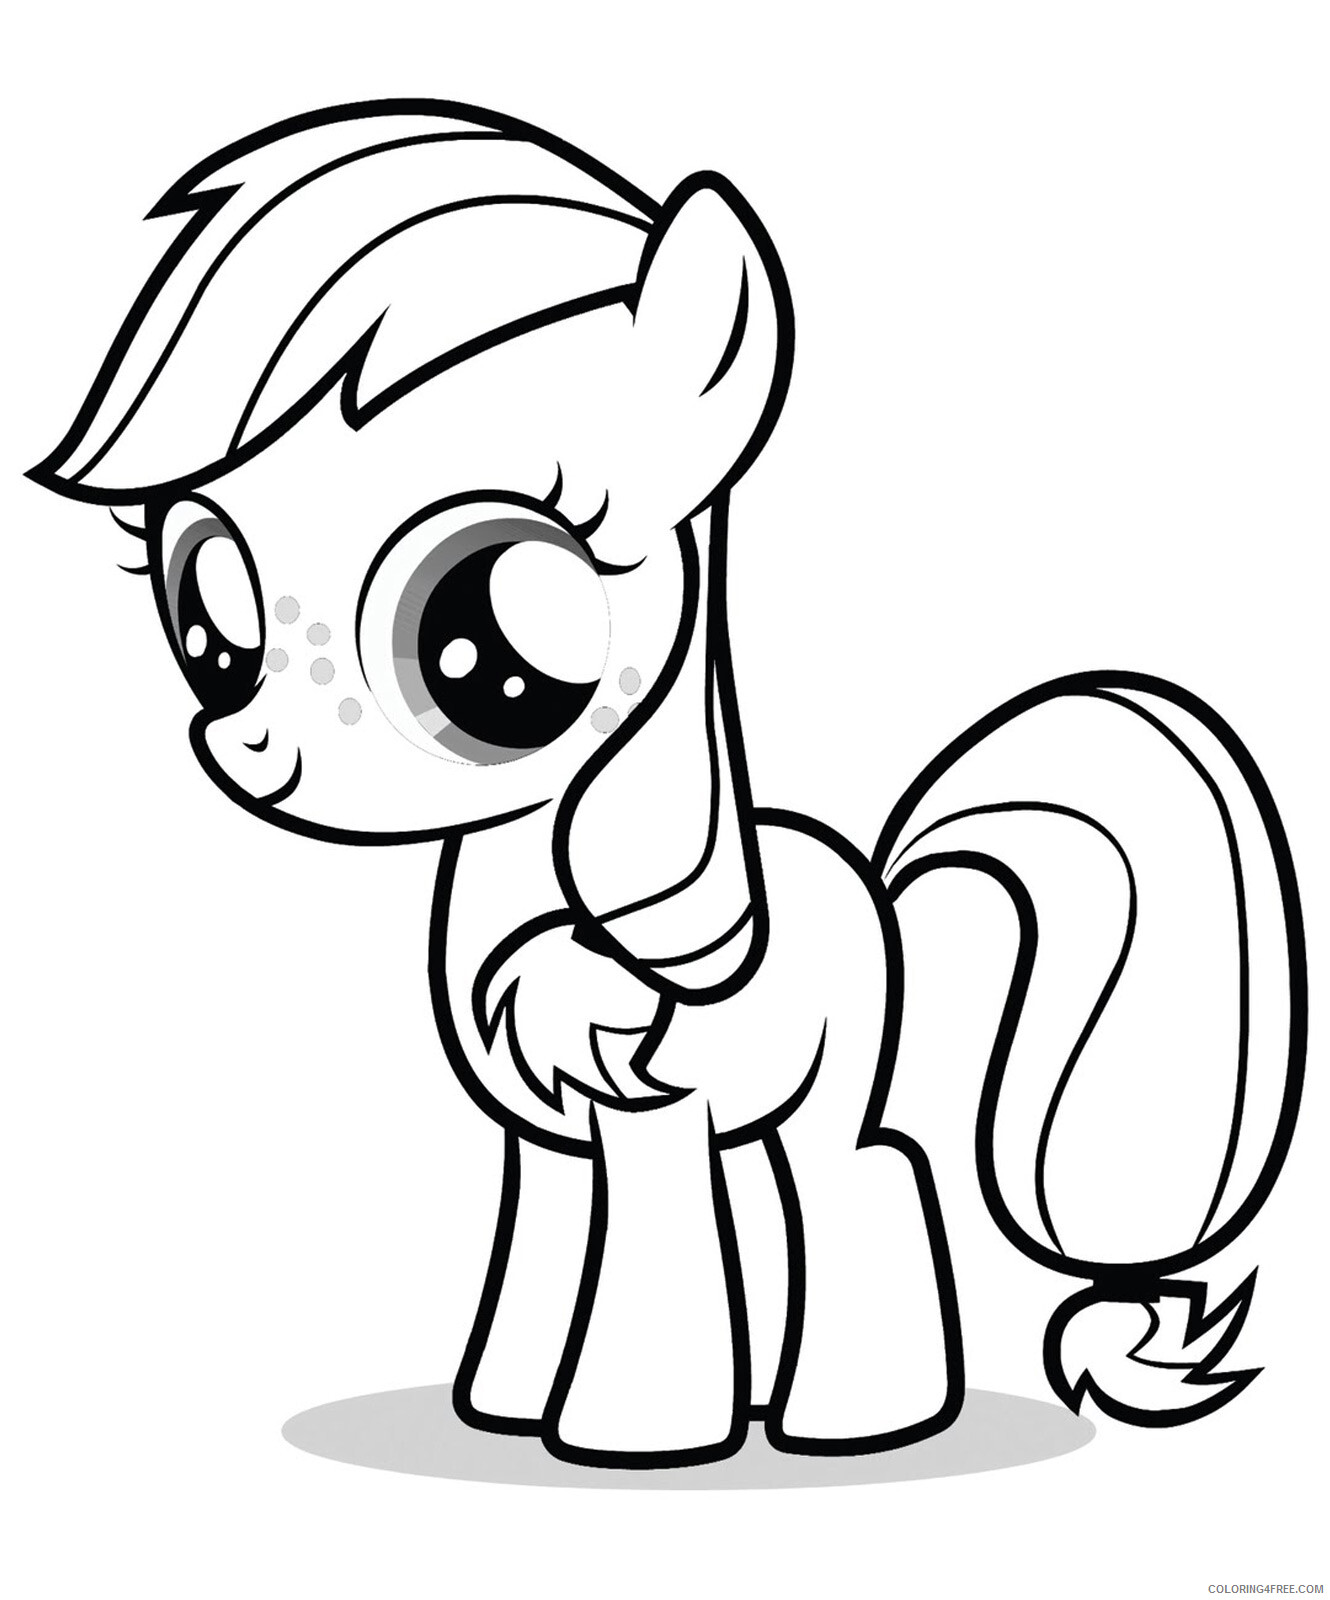 Download Mlp Coloring Pages Mlp Printable 2021 4142 Coloring4free Coloring4free Com